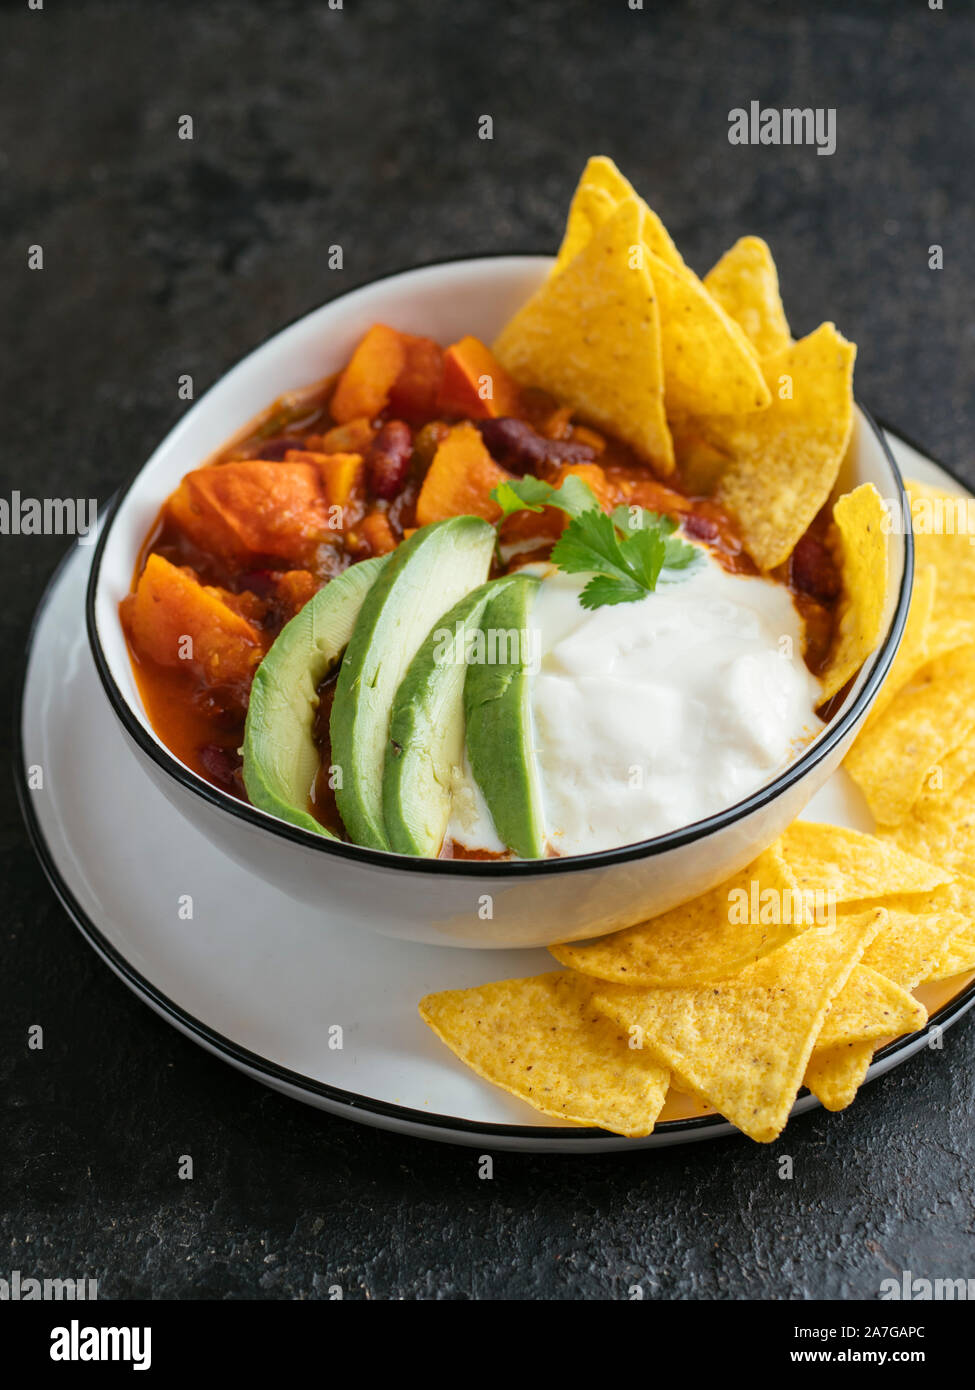 Bowl with home made pumpkin chili Stock Photo